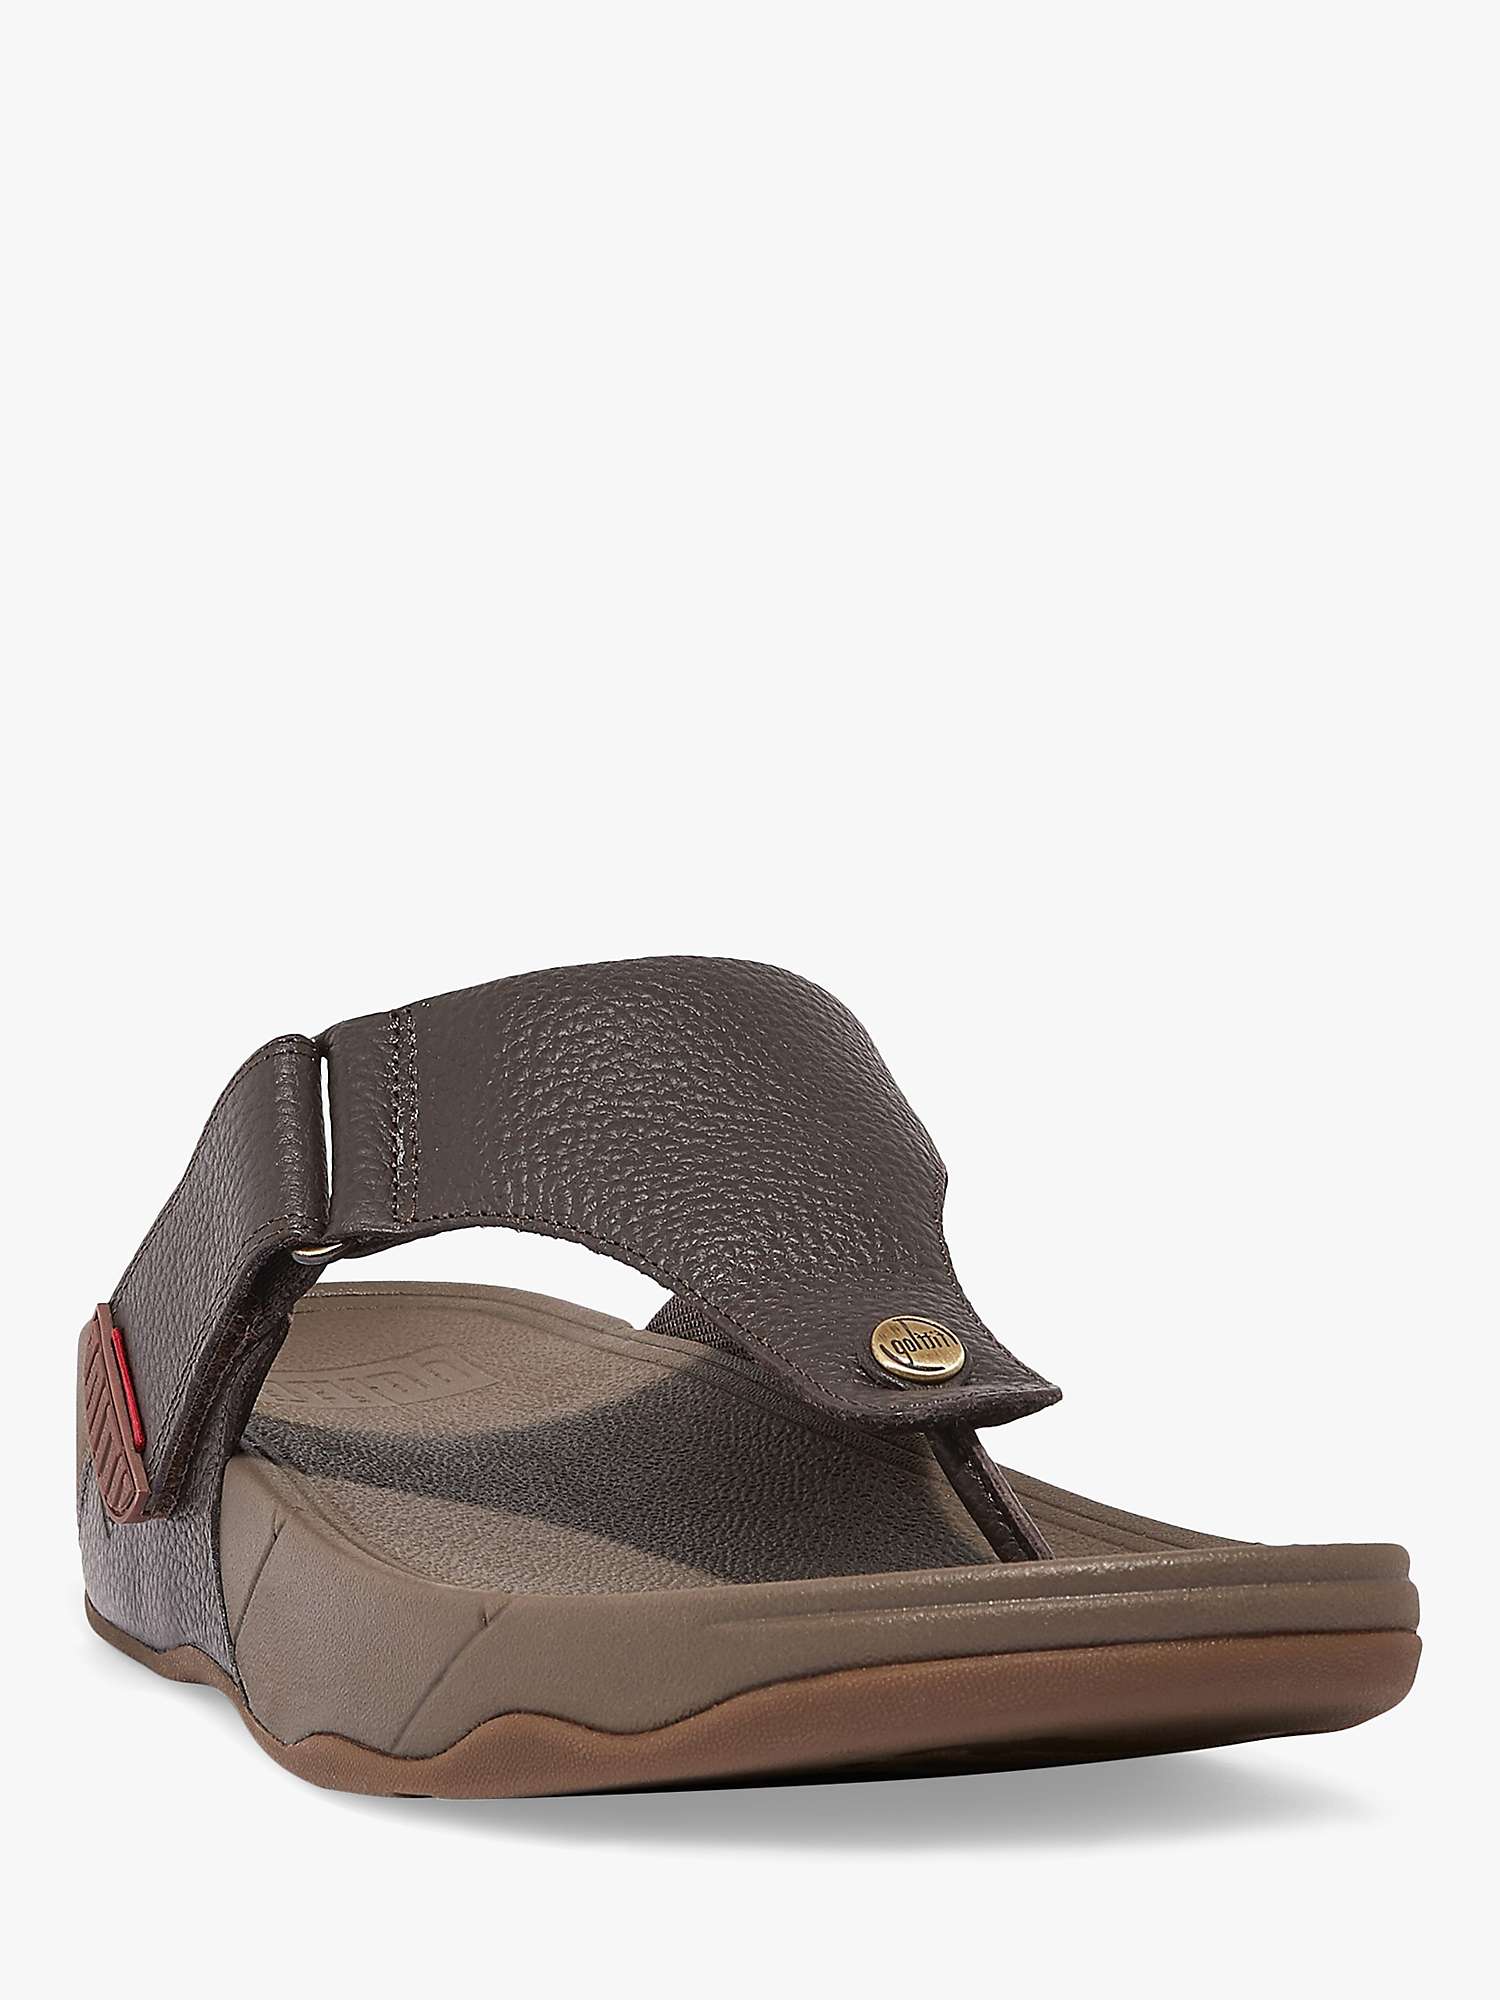 Buy FitFlop Trakk II Leather Sandals, Chocolate Online at johnlewis.com